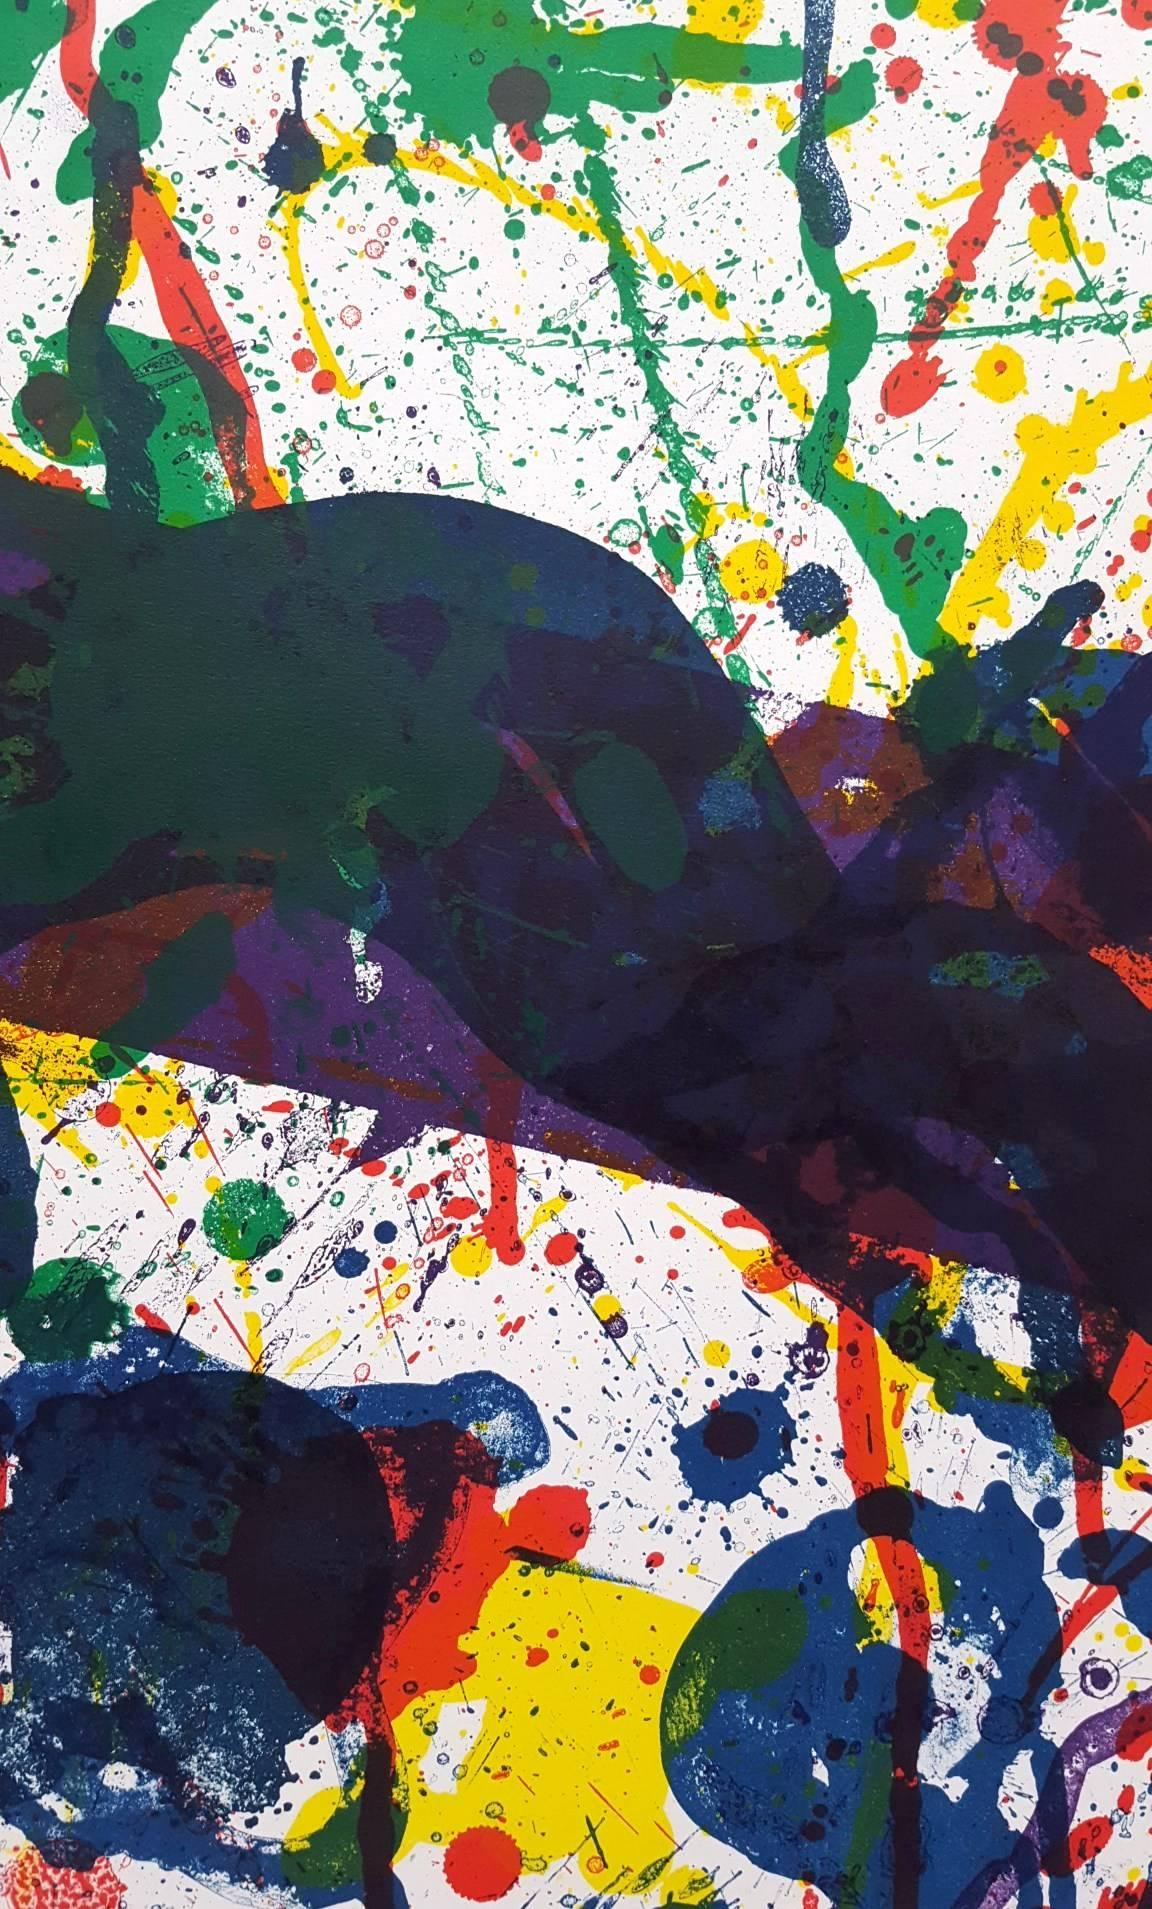 An original lithograph poster on wove paper by American artist Sam Francis (1923-1994) titled 